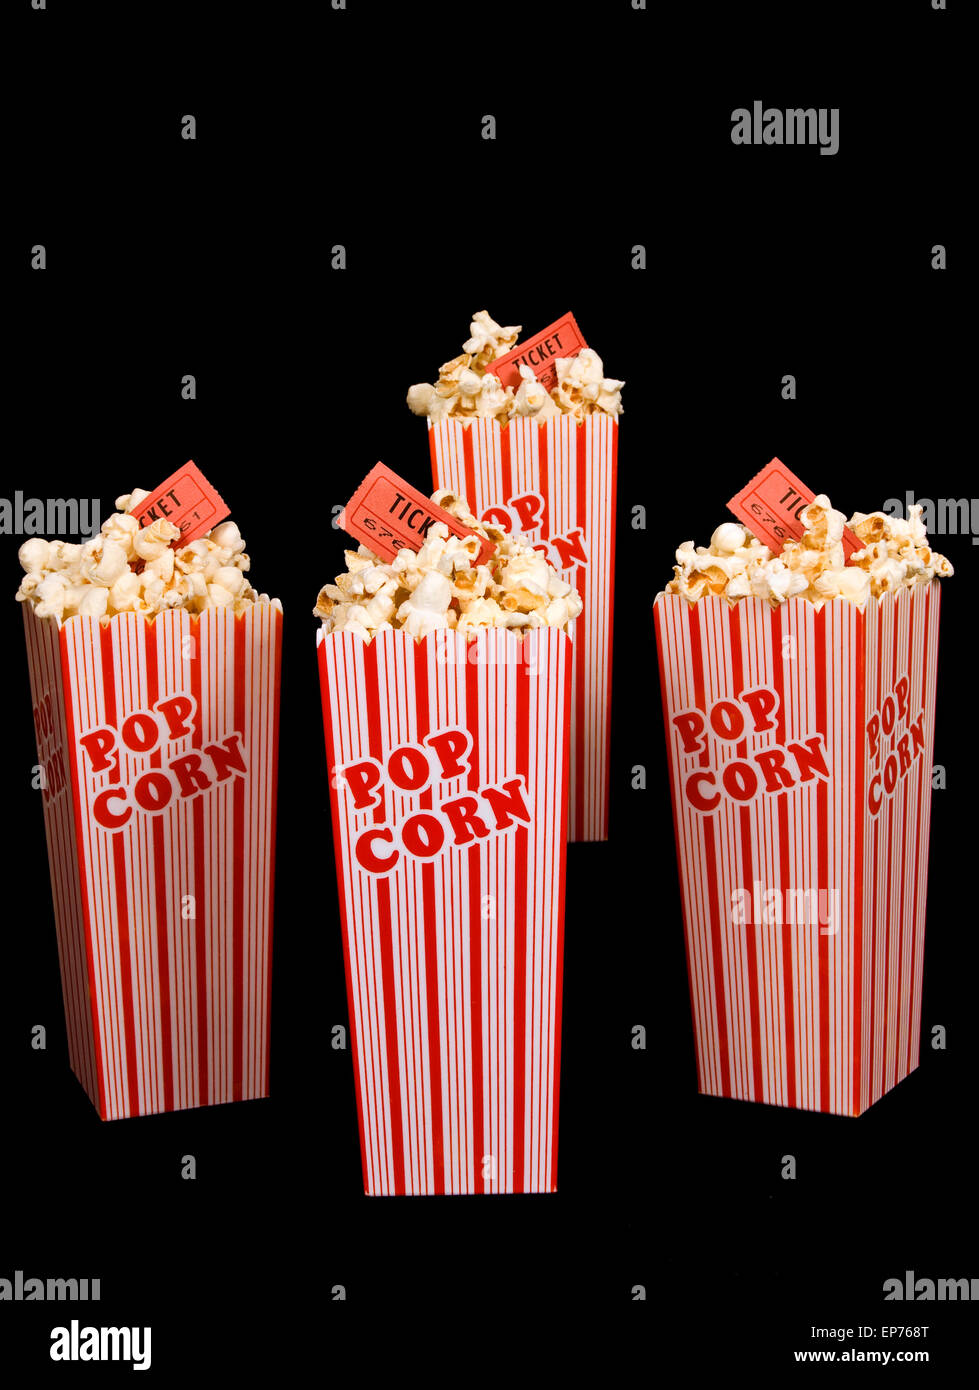 Family Fun At The Movies Small Buckets Of Popcorn With Movie Tickets On Black Background Stock Photo